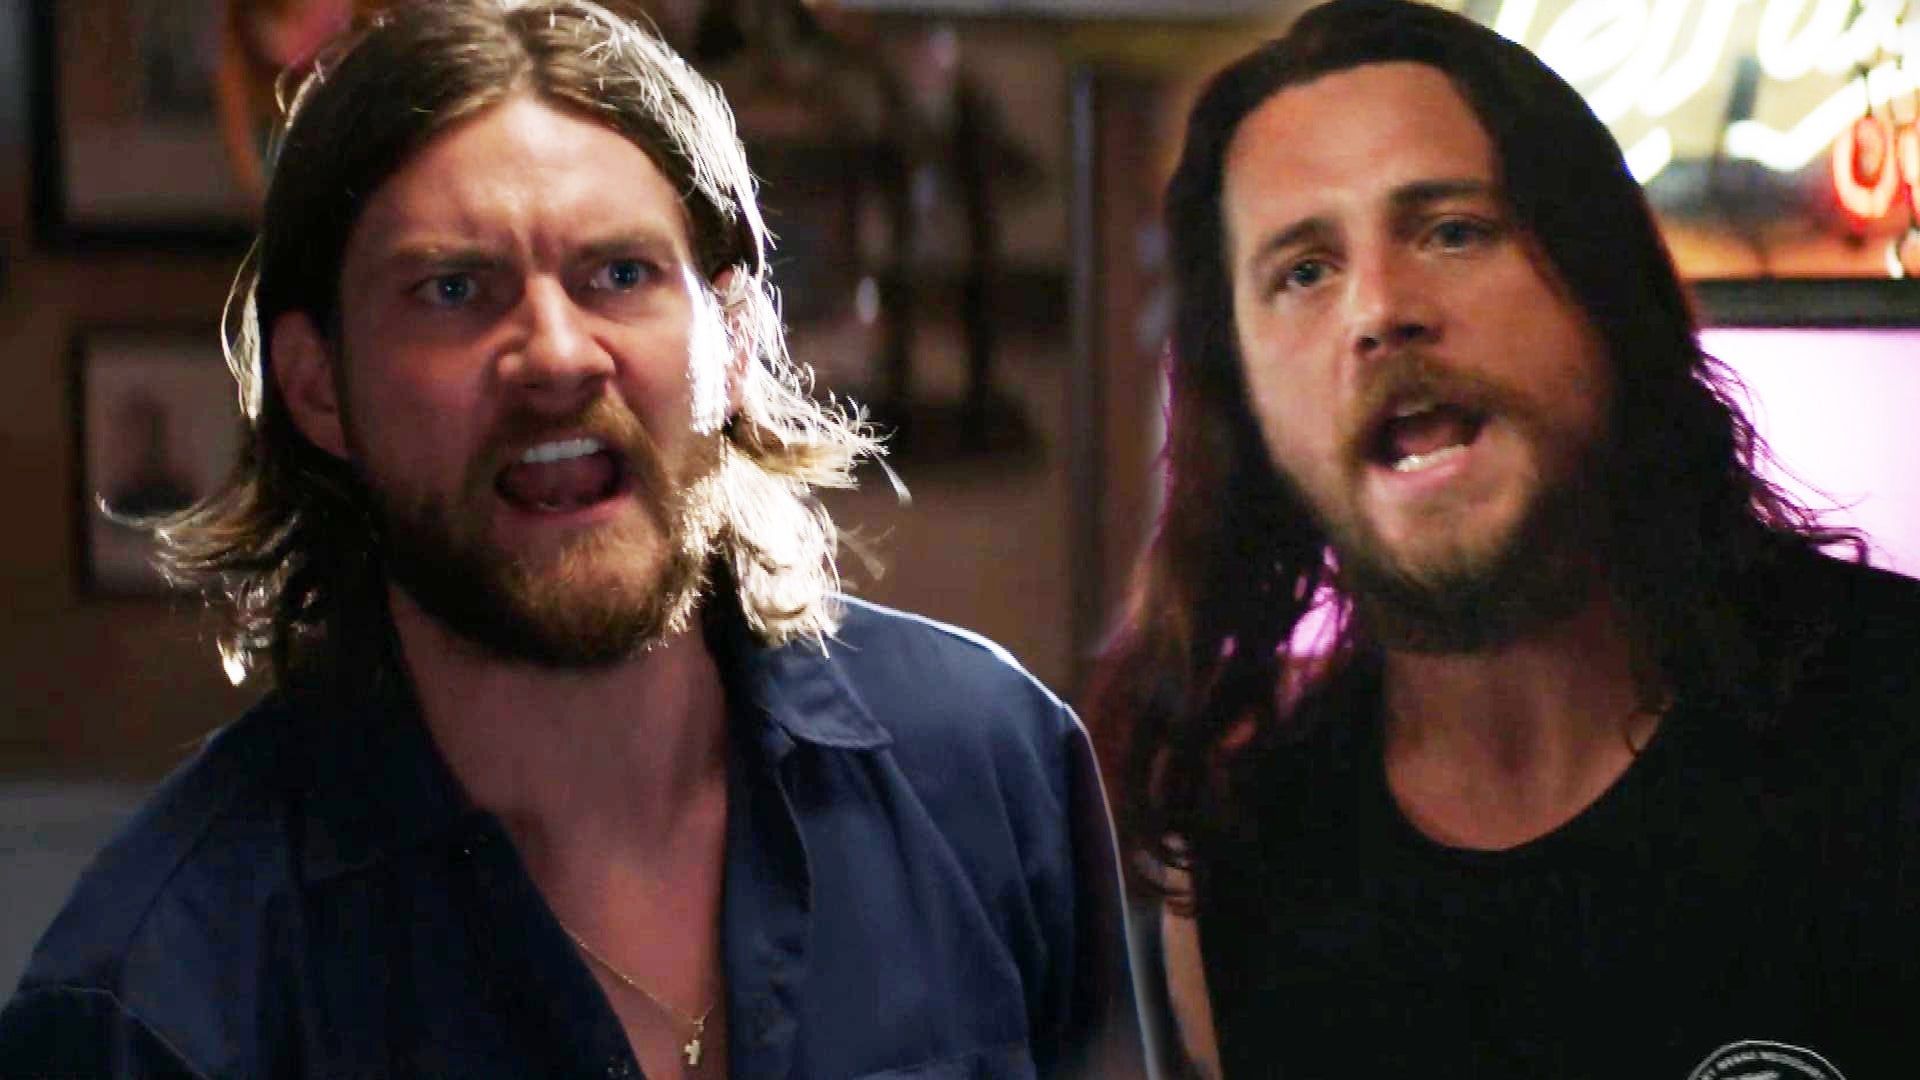 Animal Kingdom': Craig and Daren Get in a Heated Screaming Match (Exclusive)